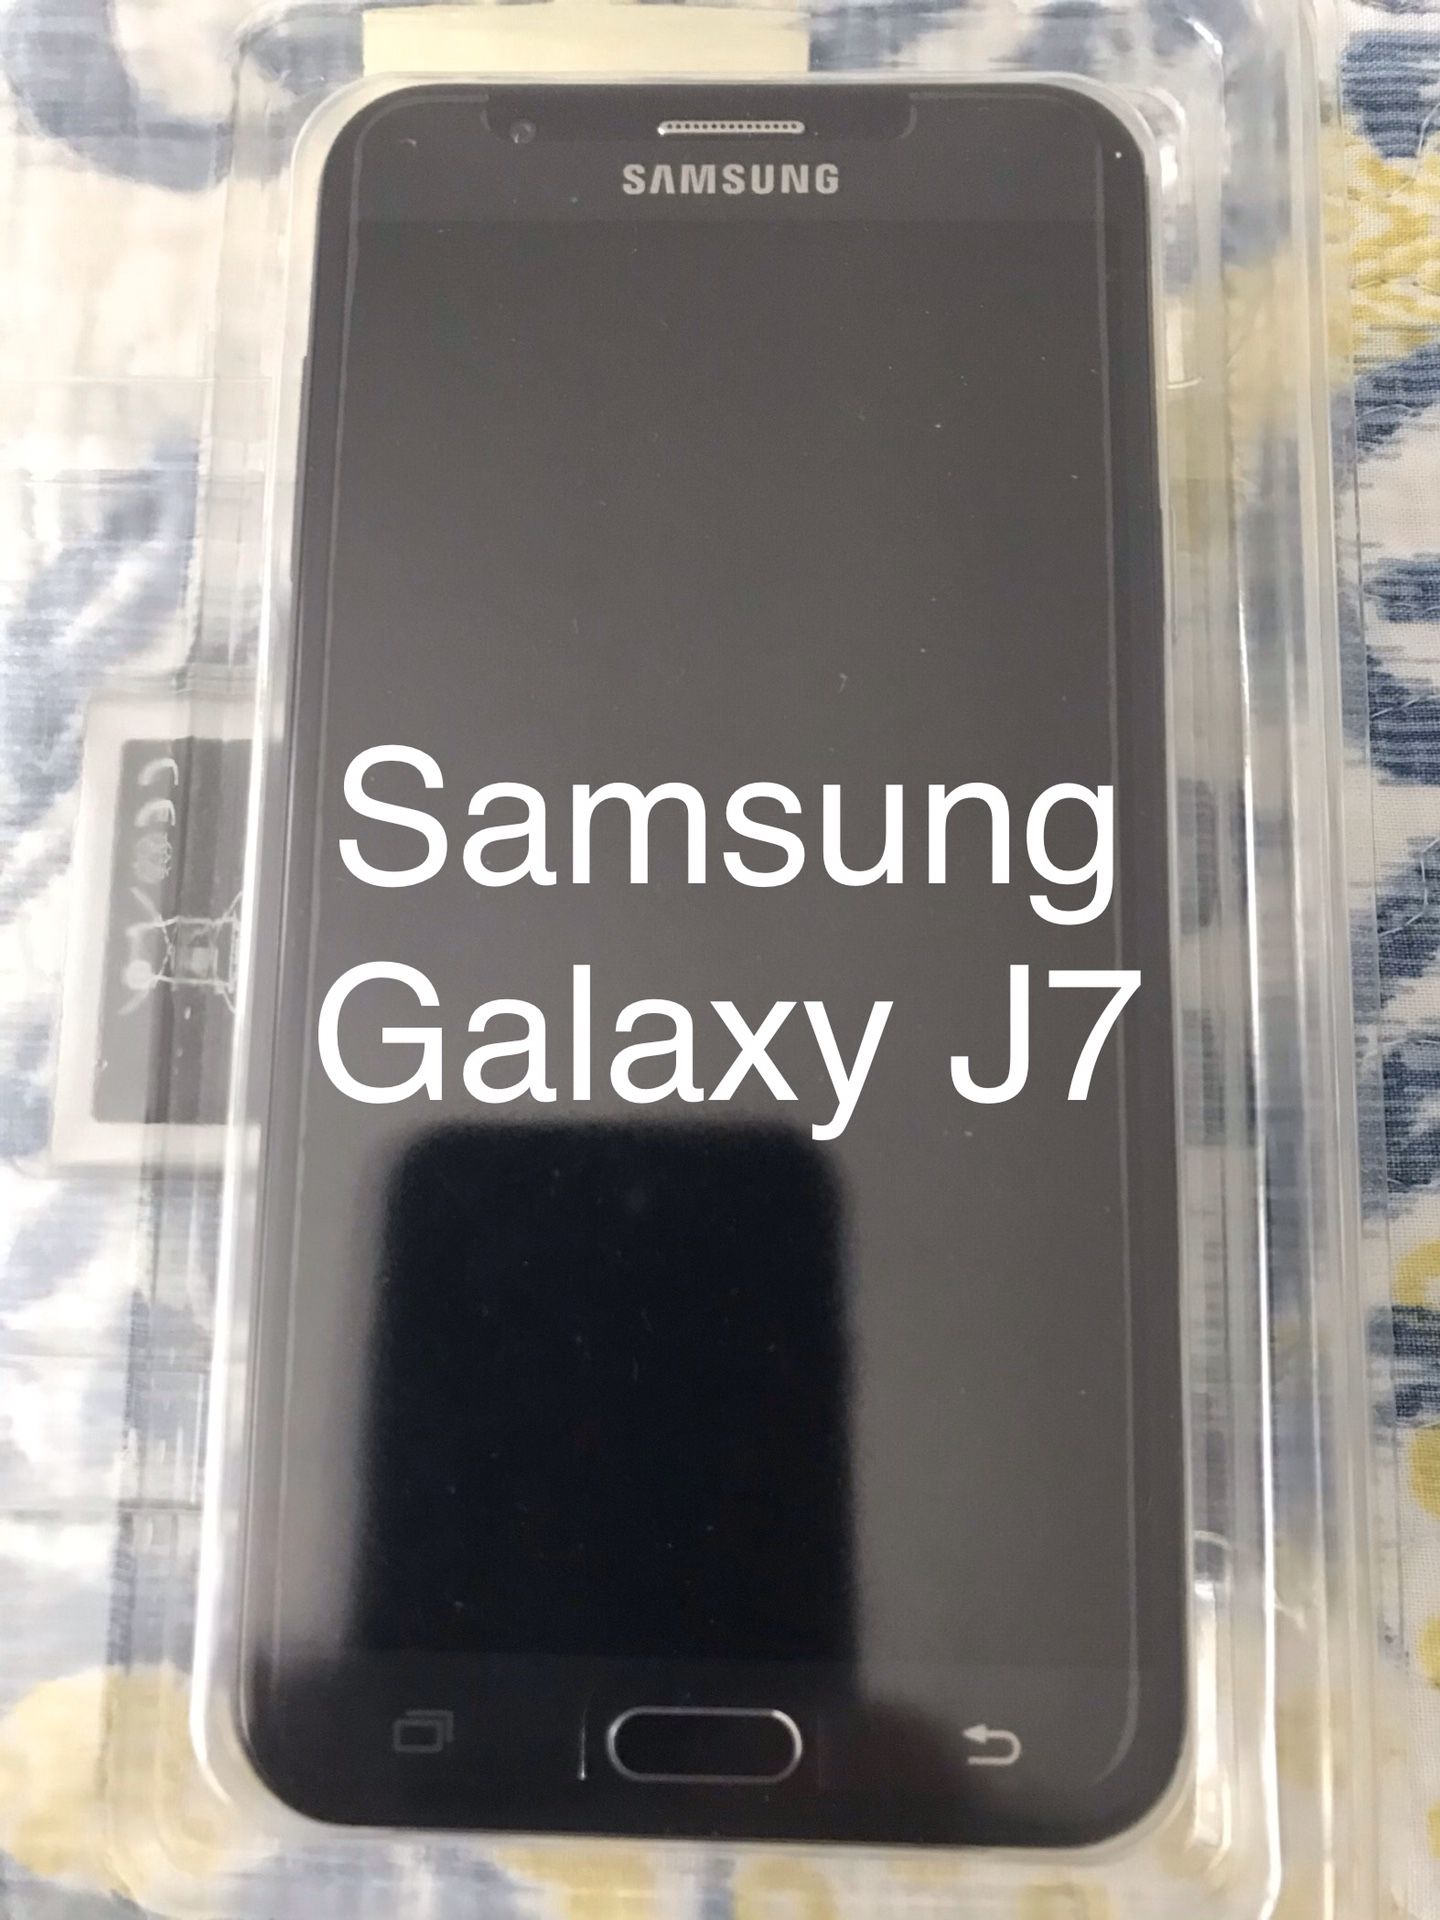 BRAND NEW Samsung Galaxy J7 PLUS 32GB (UNLOCKED) +USB CABLE +CHARGER $100 FIRM